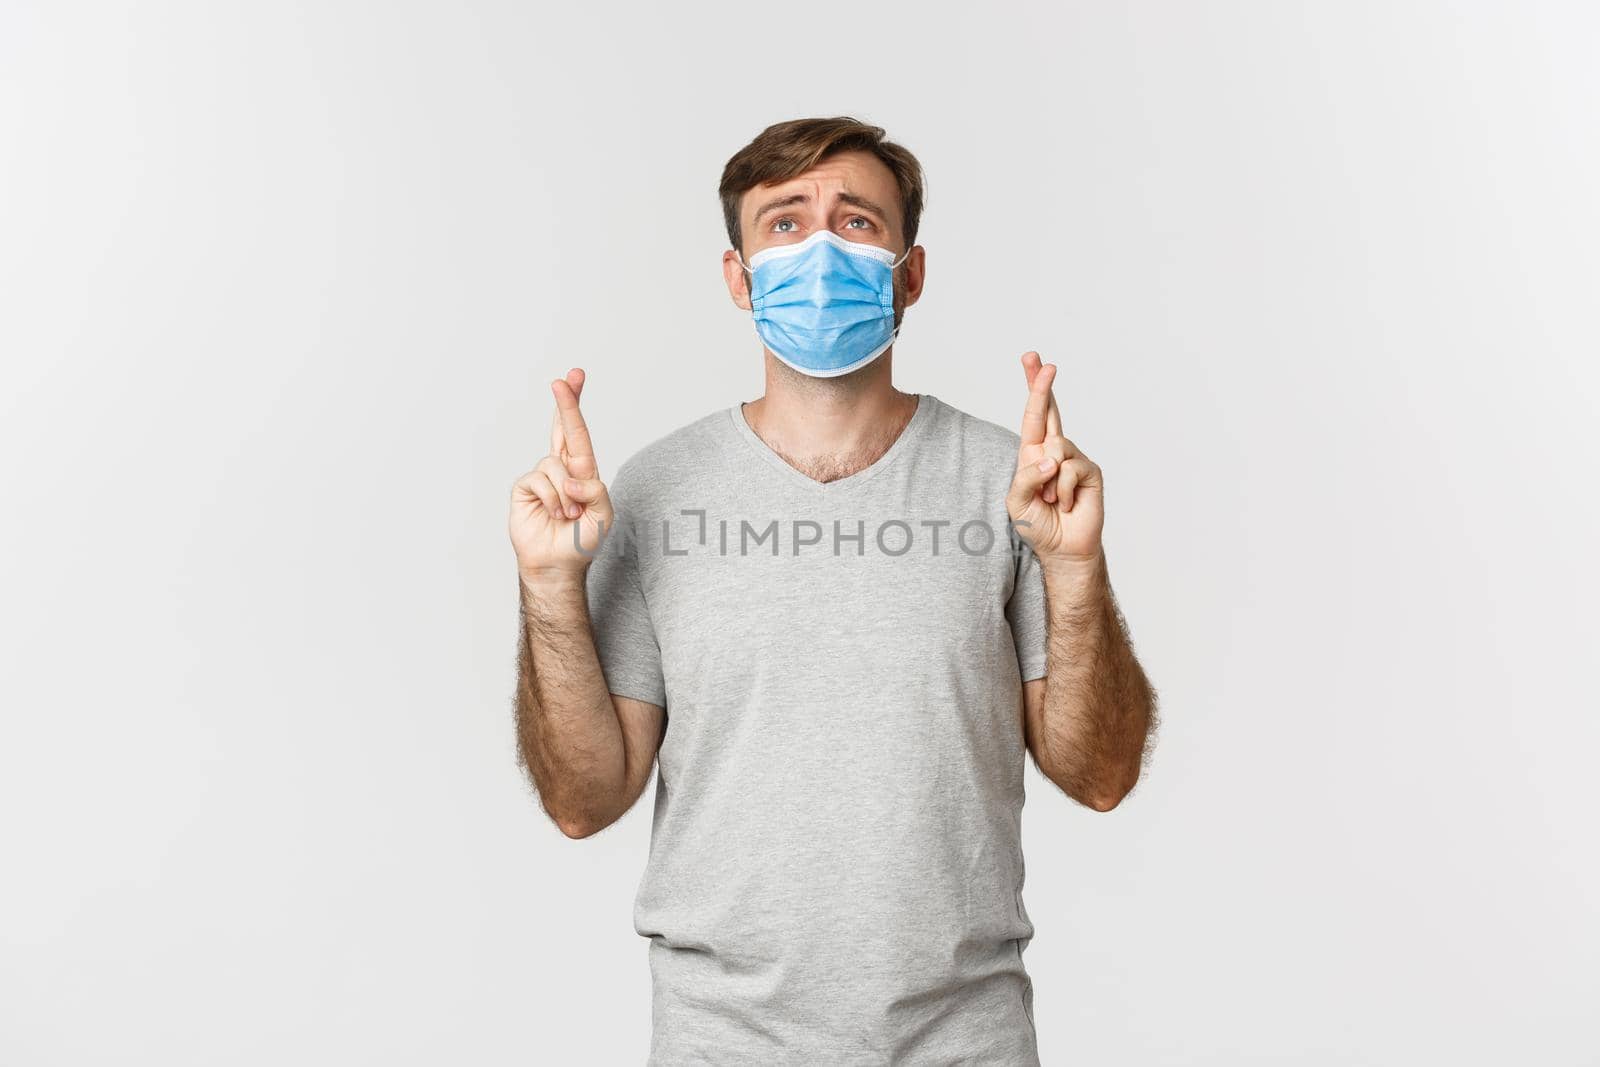 Concept of pandemic, covid-19 and social-distancing. Hopeful worried guy in medical mask, cross fingers for good luck and begging god, looking up desperate, standing over white background.